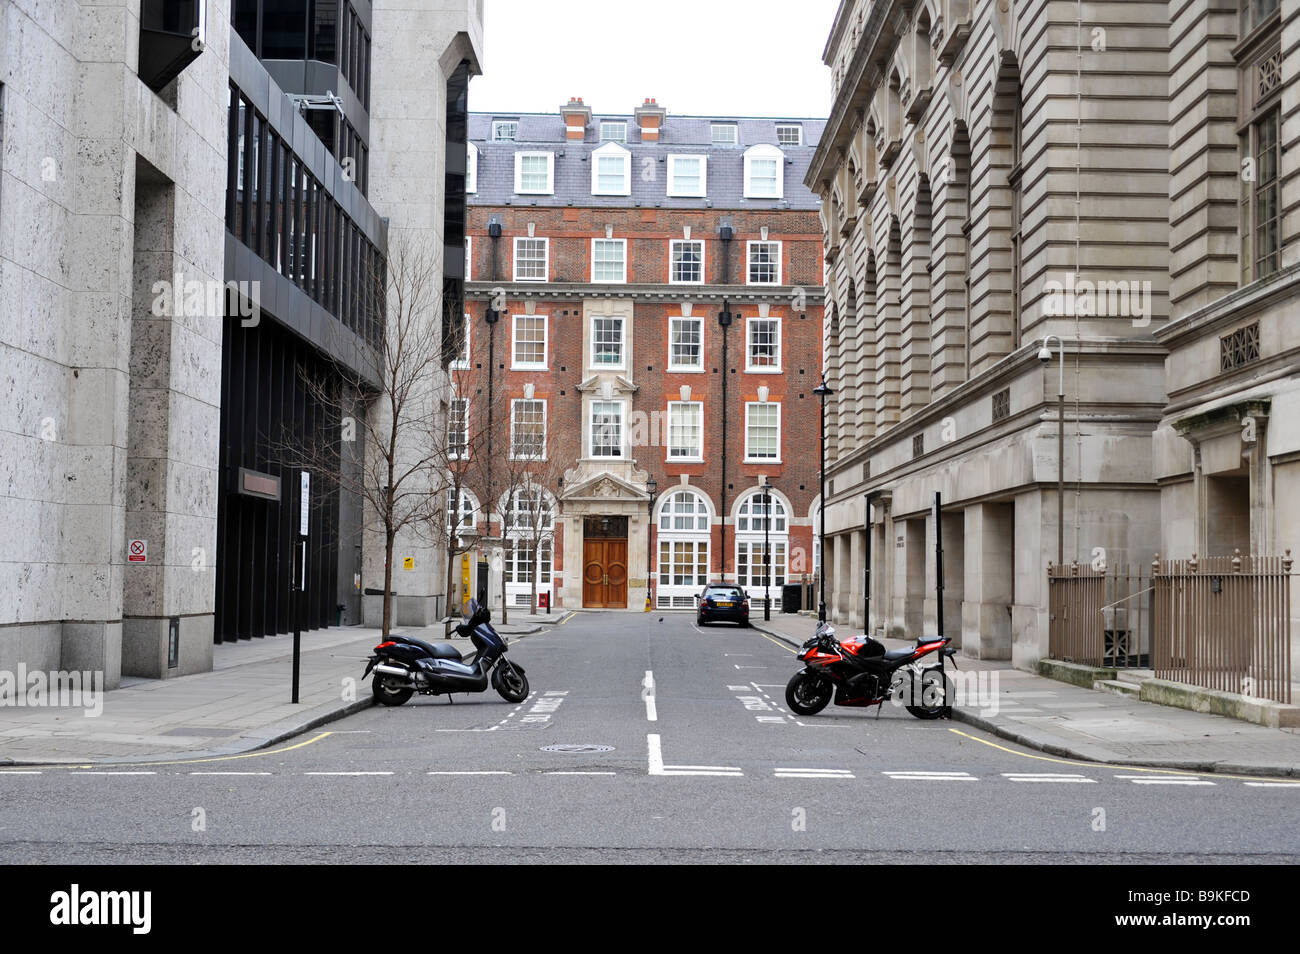 Two Parked Motor Cycles on a London, England Street Stock Photo